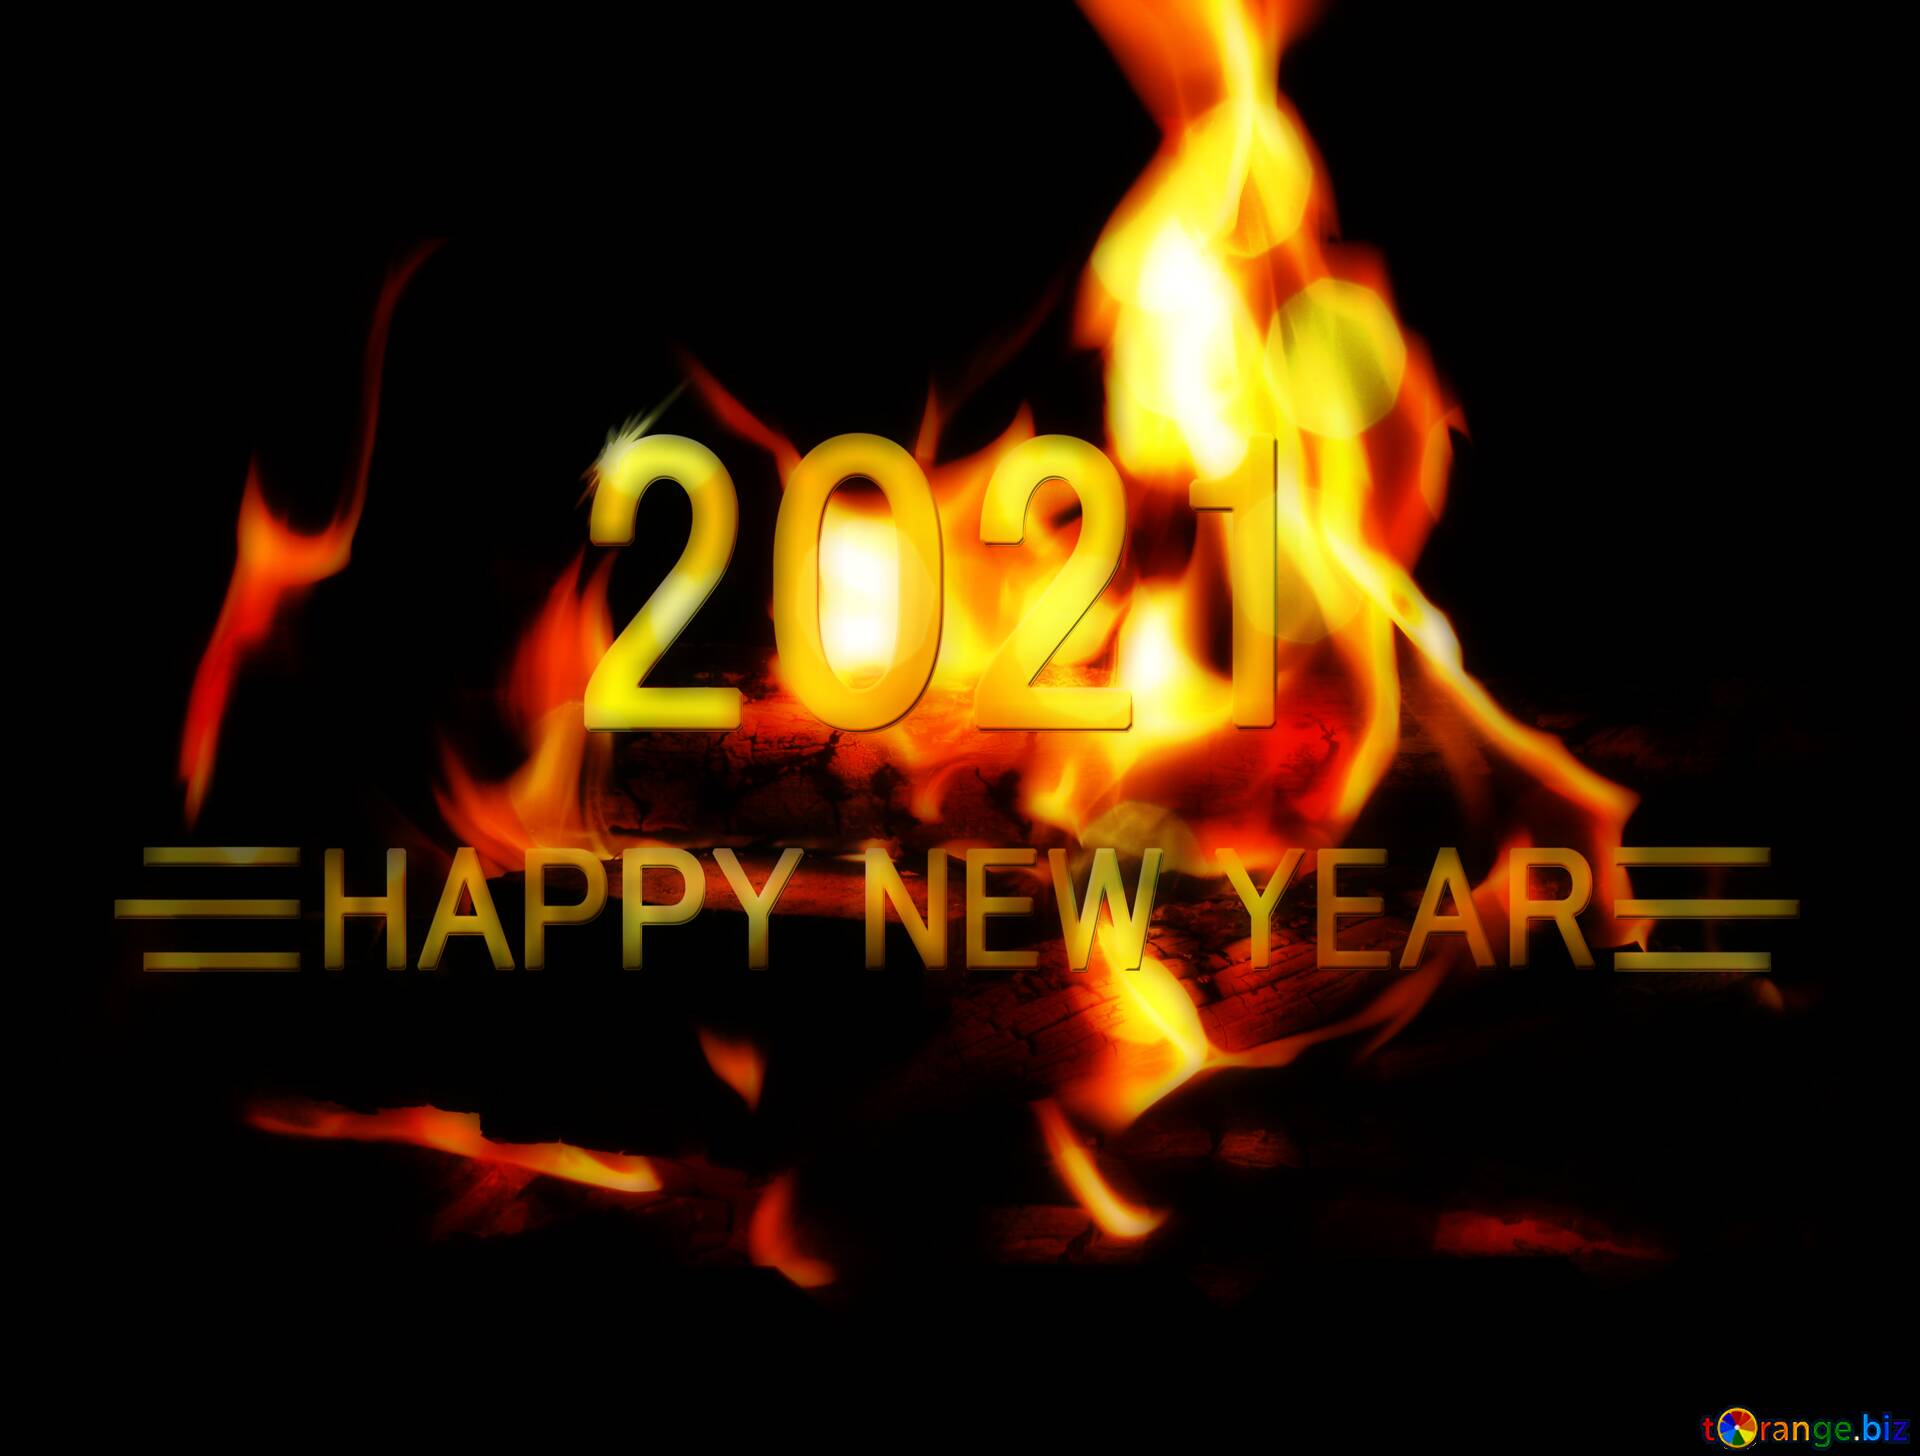 Download Free Picture Fire Happy New Year 2021 On CC BY License Free Image Stock TOrange.biz Fx №213040